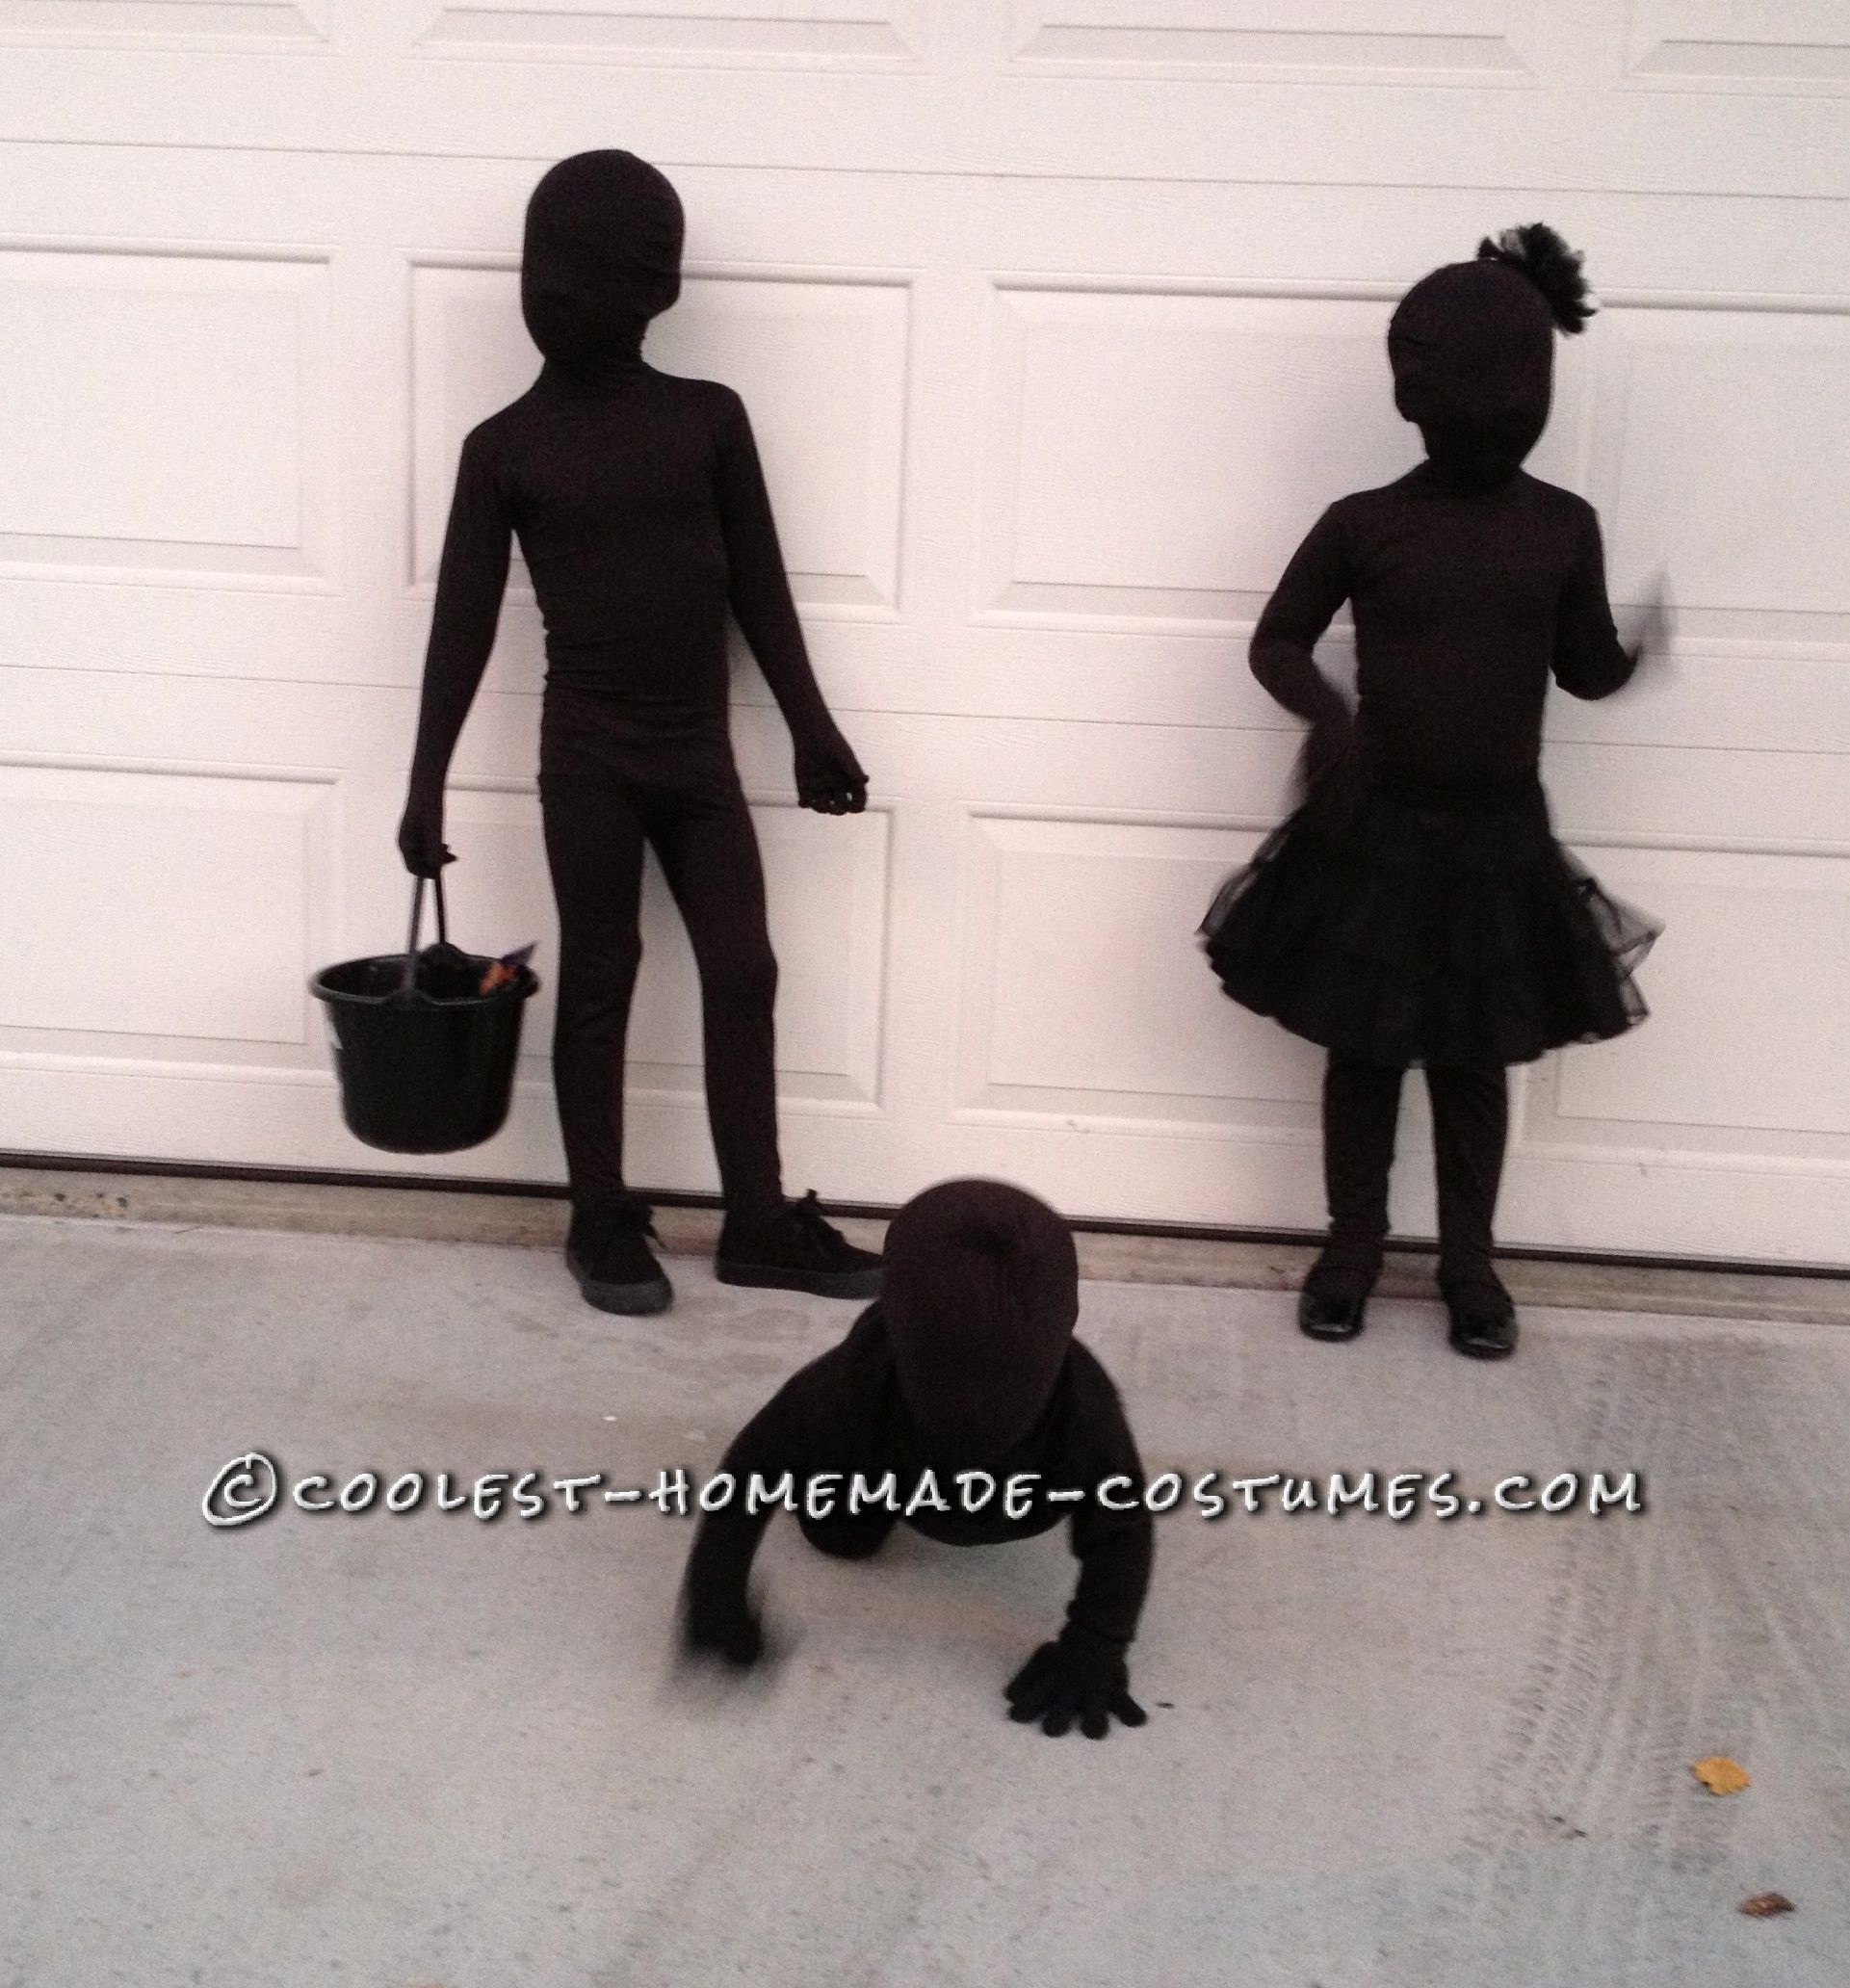 Costume Idea – Shadows – Using Morph Suits and added balck accessories